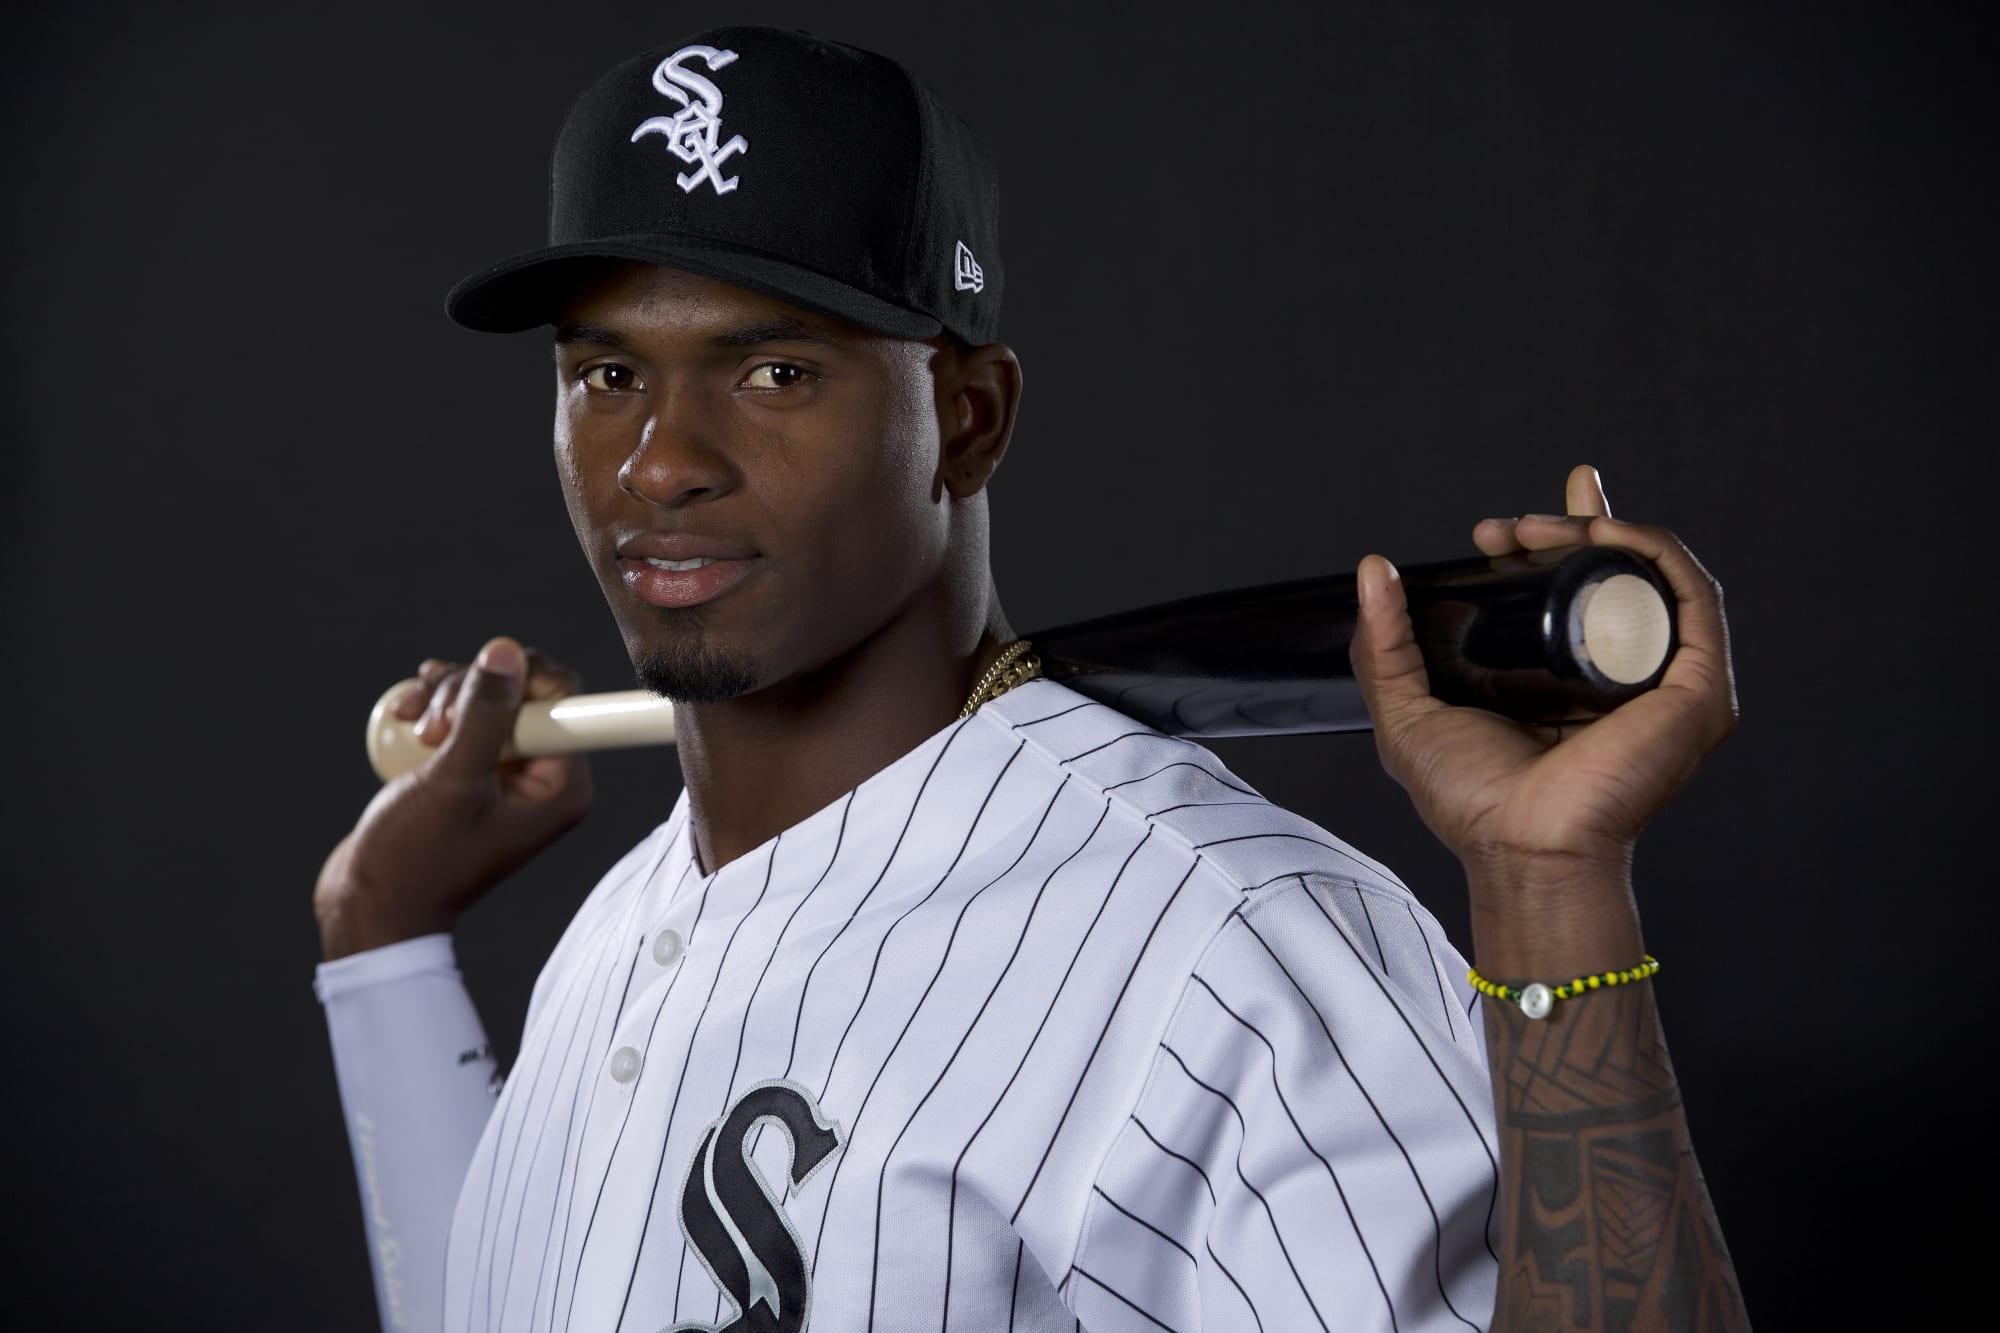 Luis Robert returns to White Sox' lineup but not in his customary